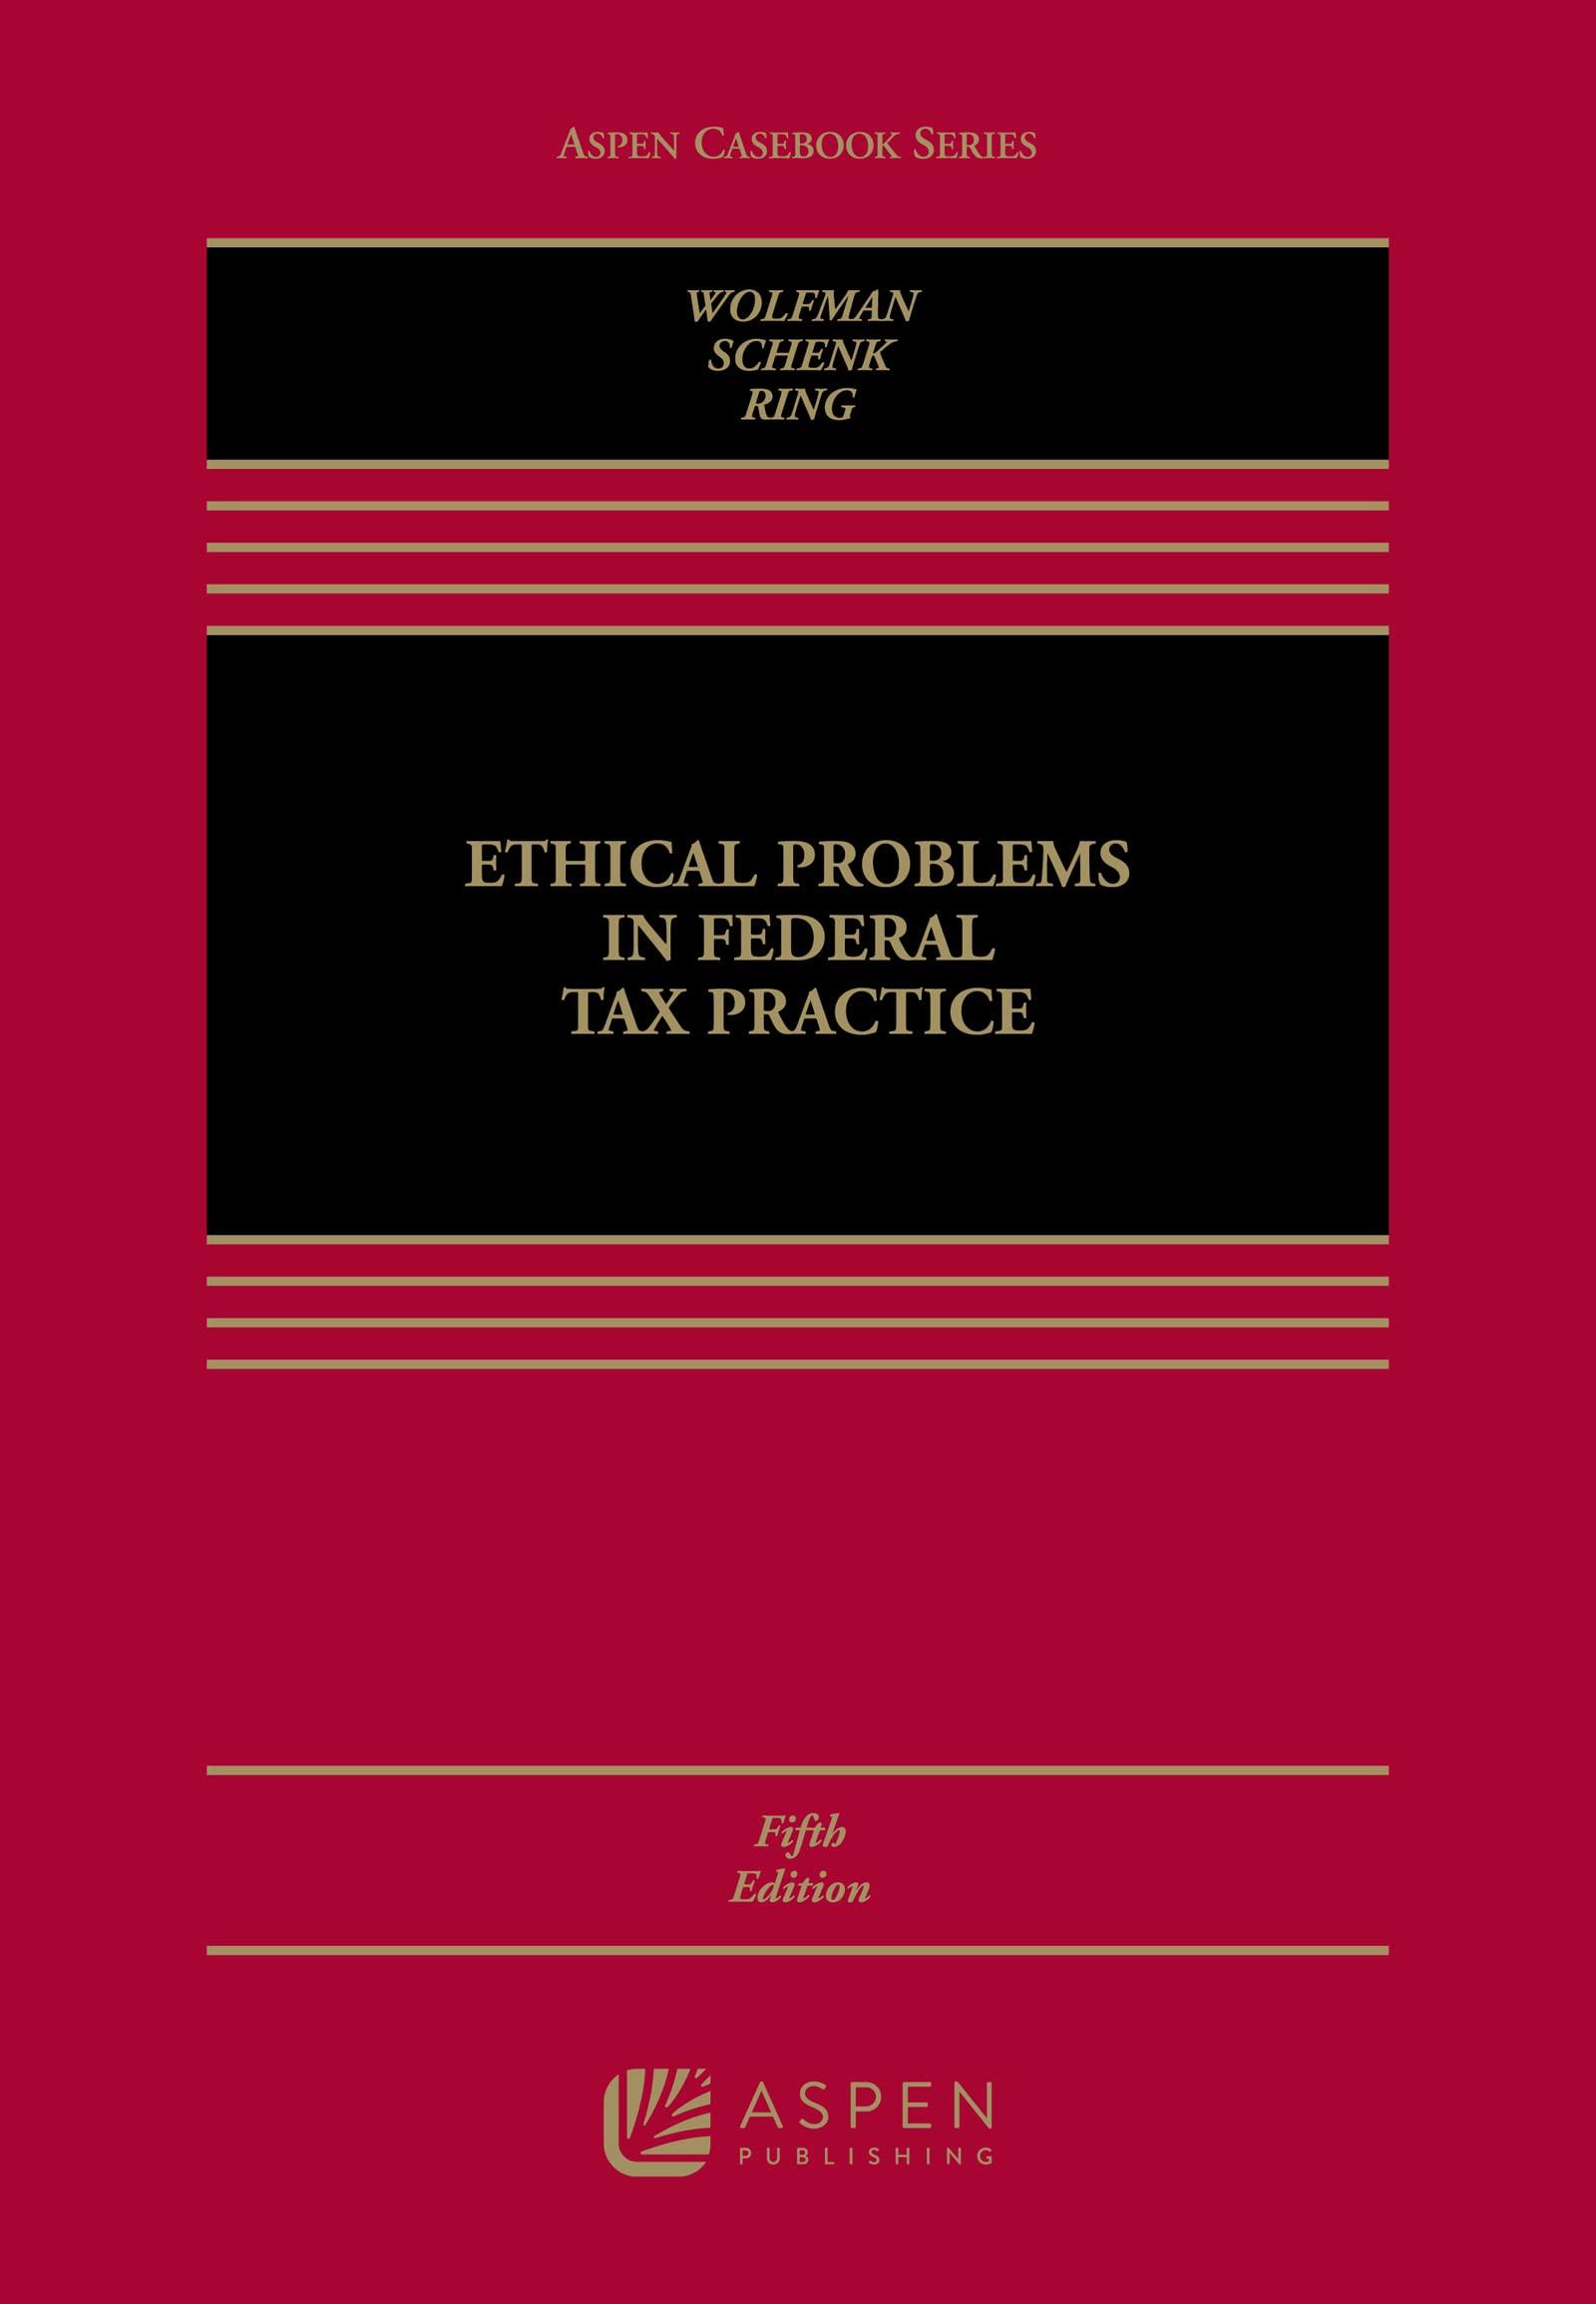 ethical problems in federal tax practice 5th edition bernard wolfman, deborah h. schenk, diane m. ring